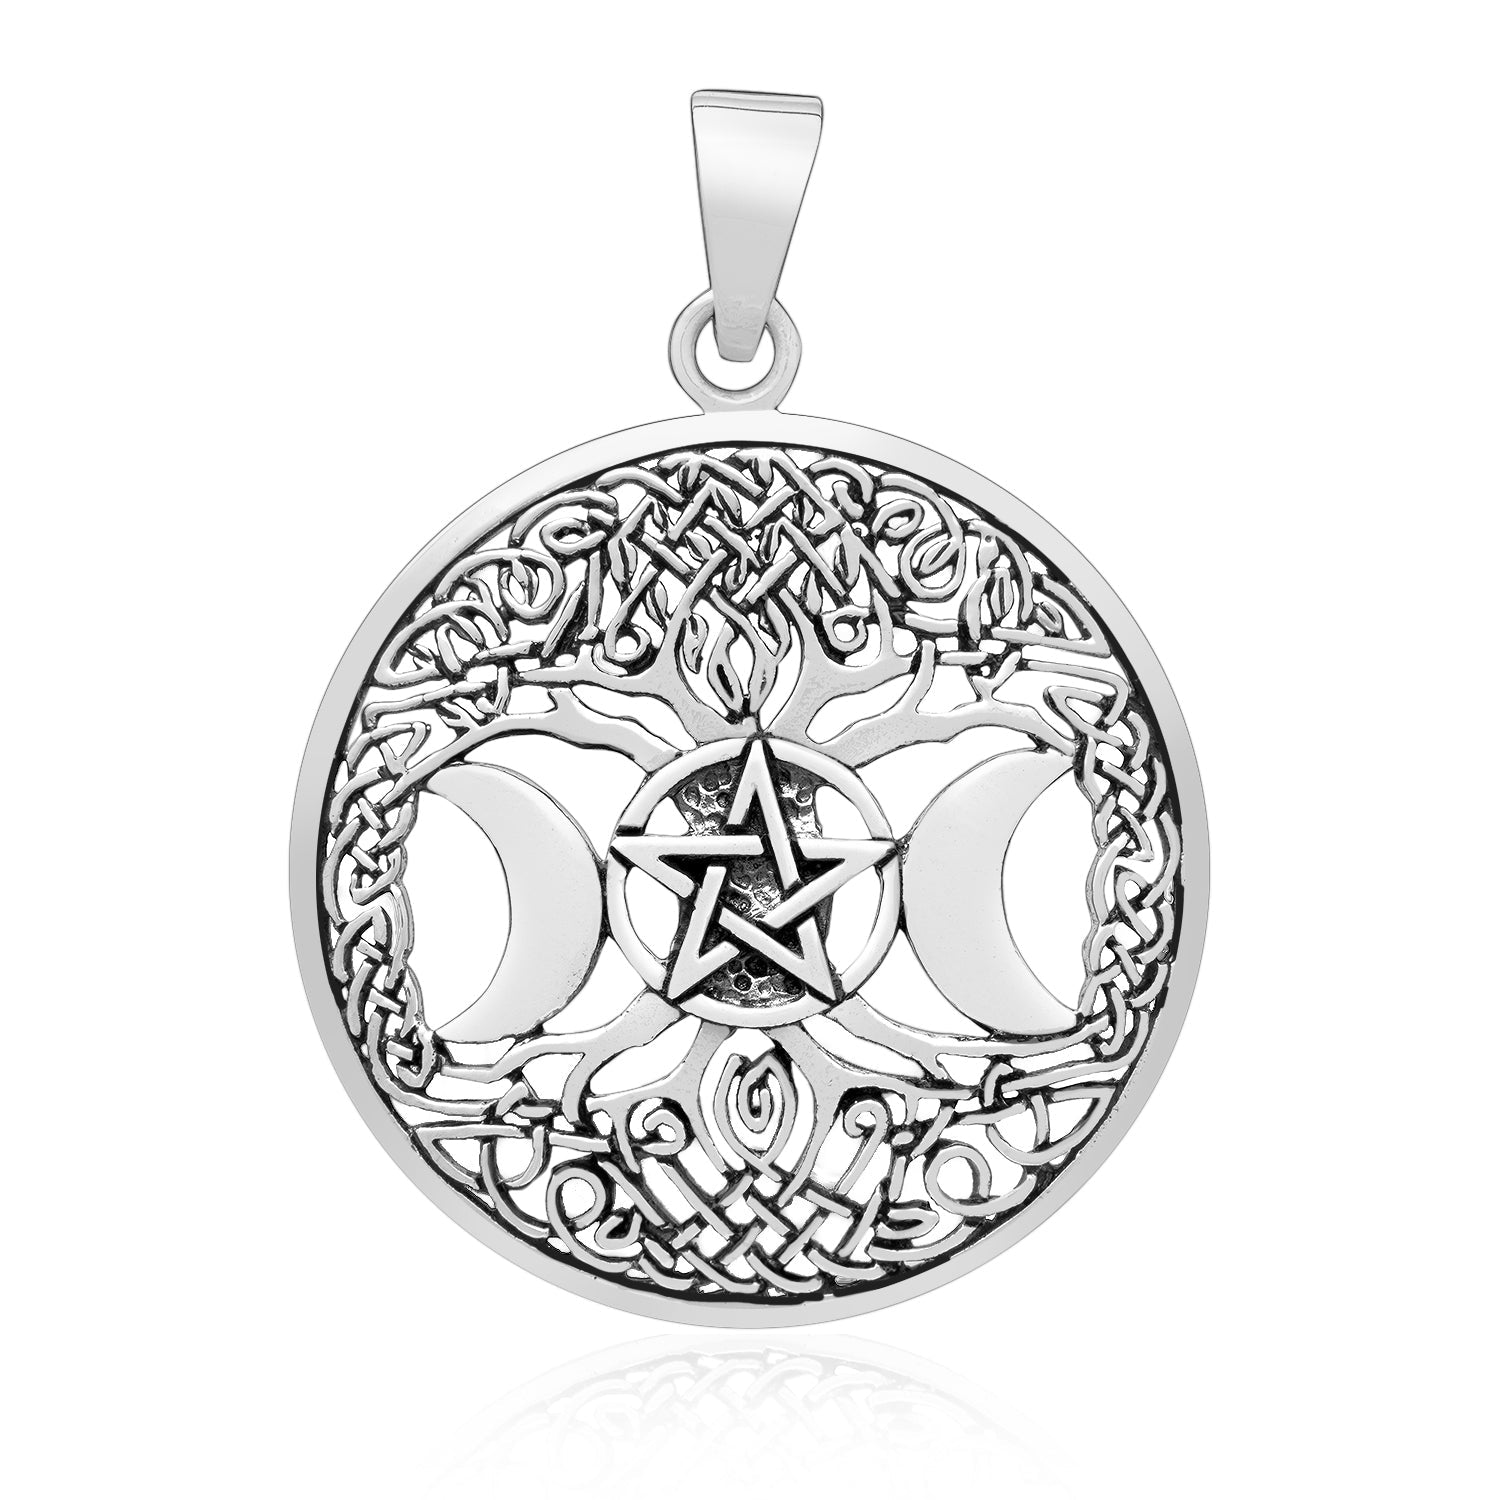 925 Sterling Silver Triple Moon Goddess Pendant with Yggdrasil